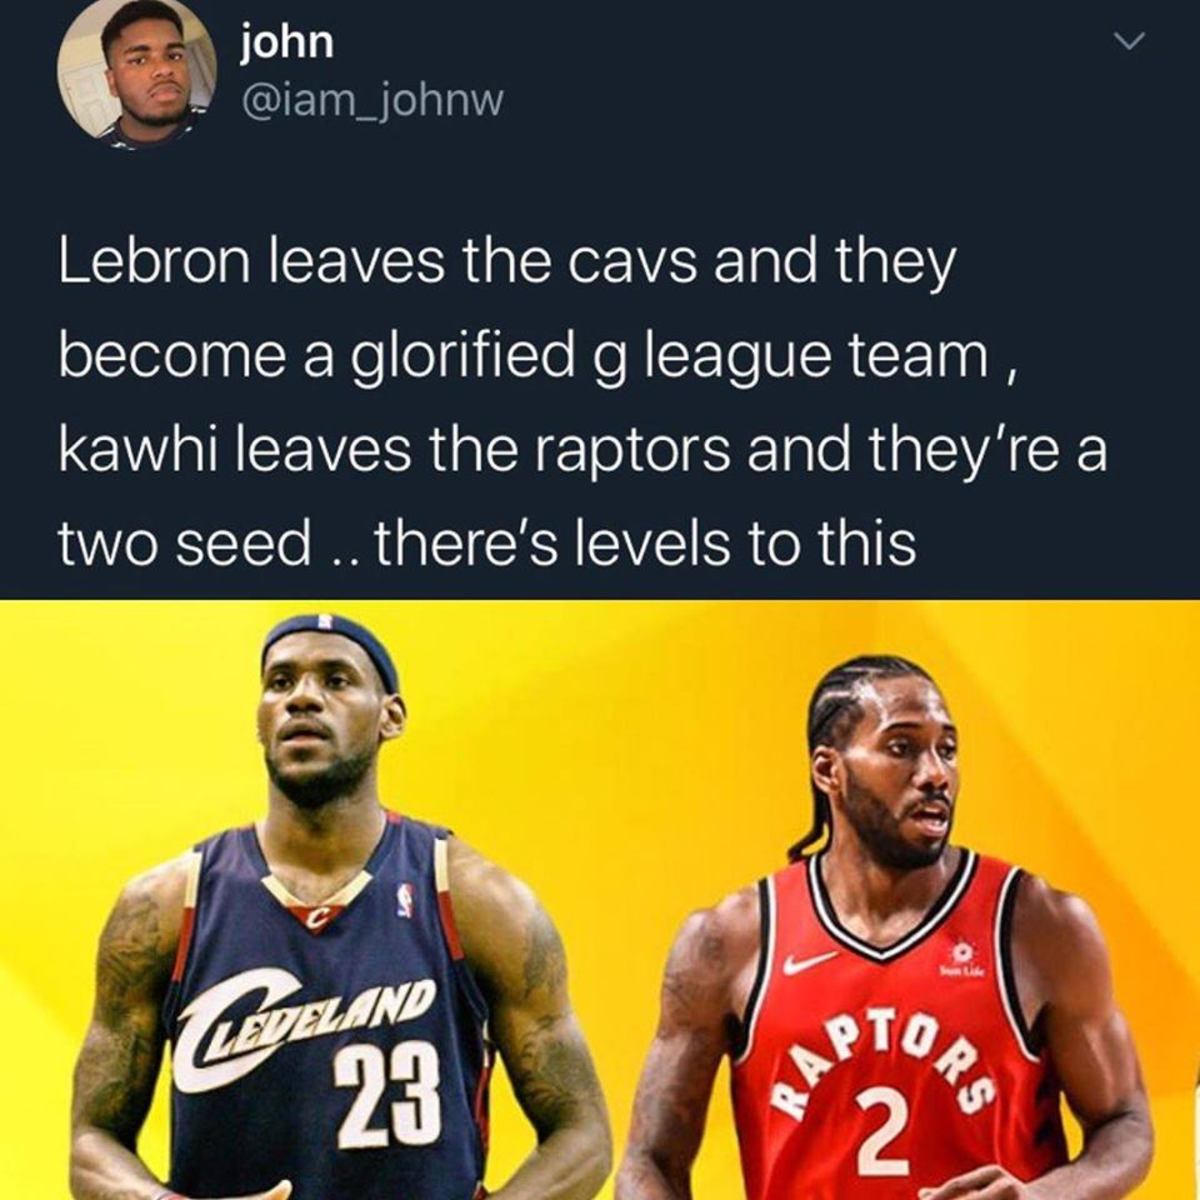 NBA Fan's Huge Comparison: 'LeBron Leaves The Cavs And They Become A G-League Team, Kawhi Leaves The Raptors And They're Two Seed'